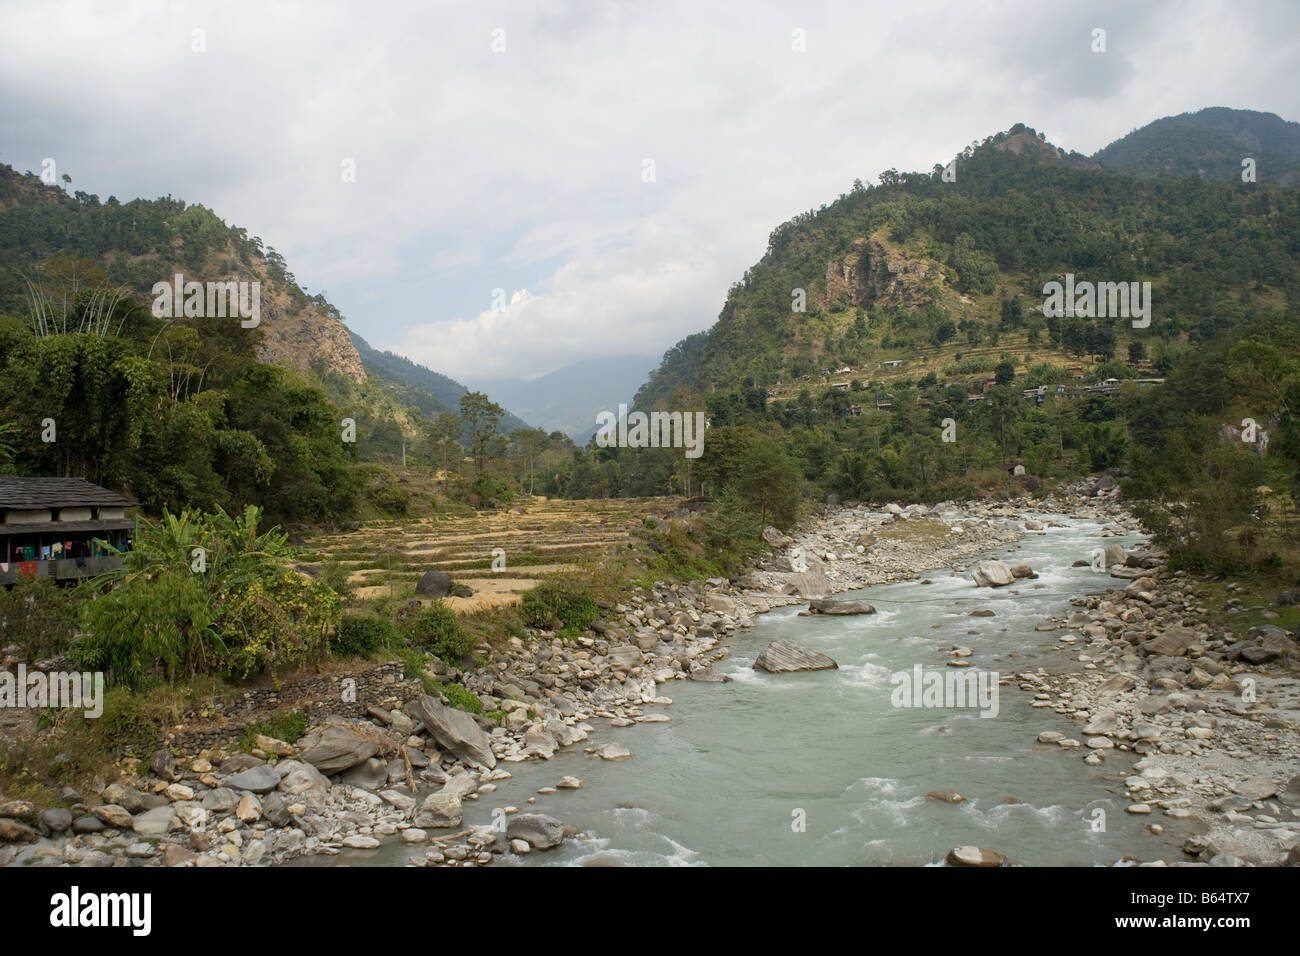 Fishtail mountain from a rope bridge crossing the Modi River  in the Annapurna range of the Himalayas, Nepal Stock Photo